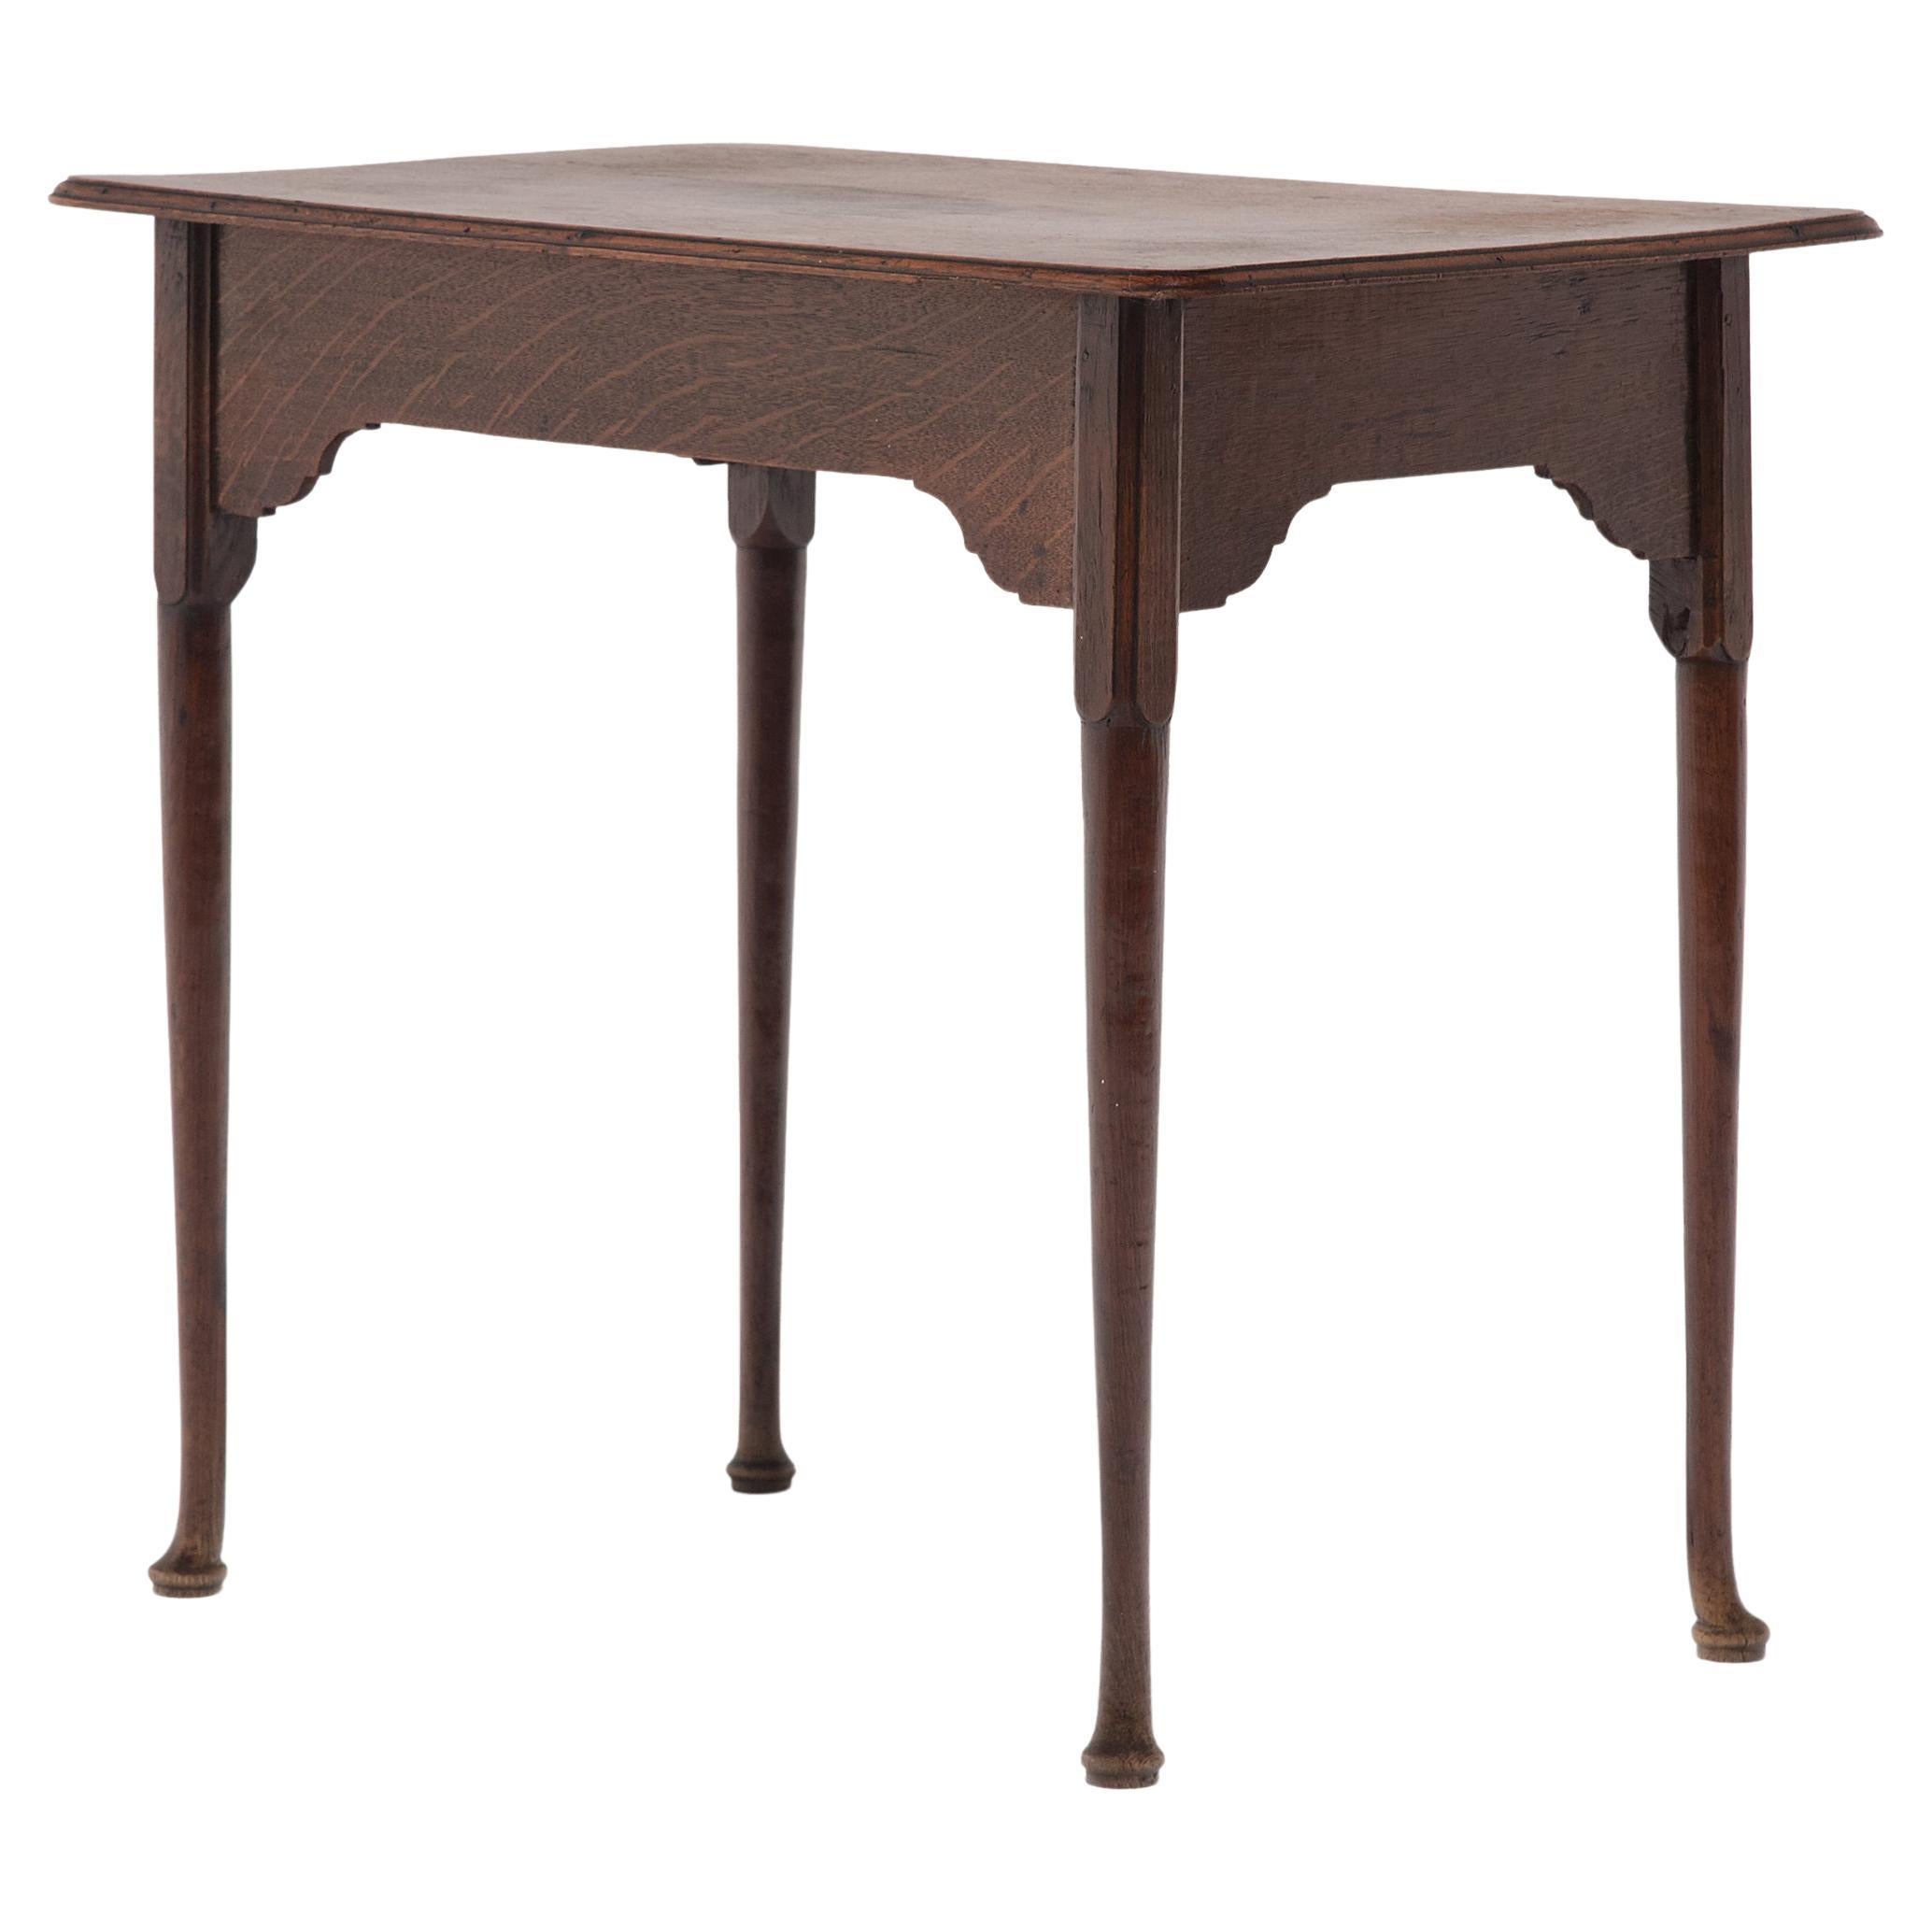 English Rectangular Side Table, c. 1850 For Sale